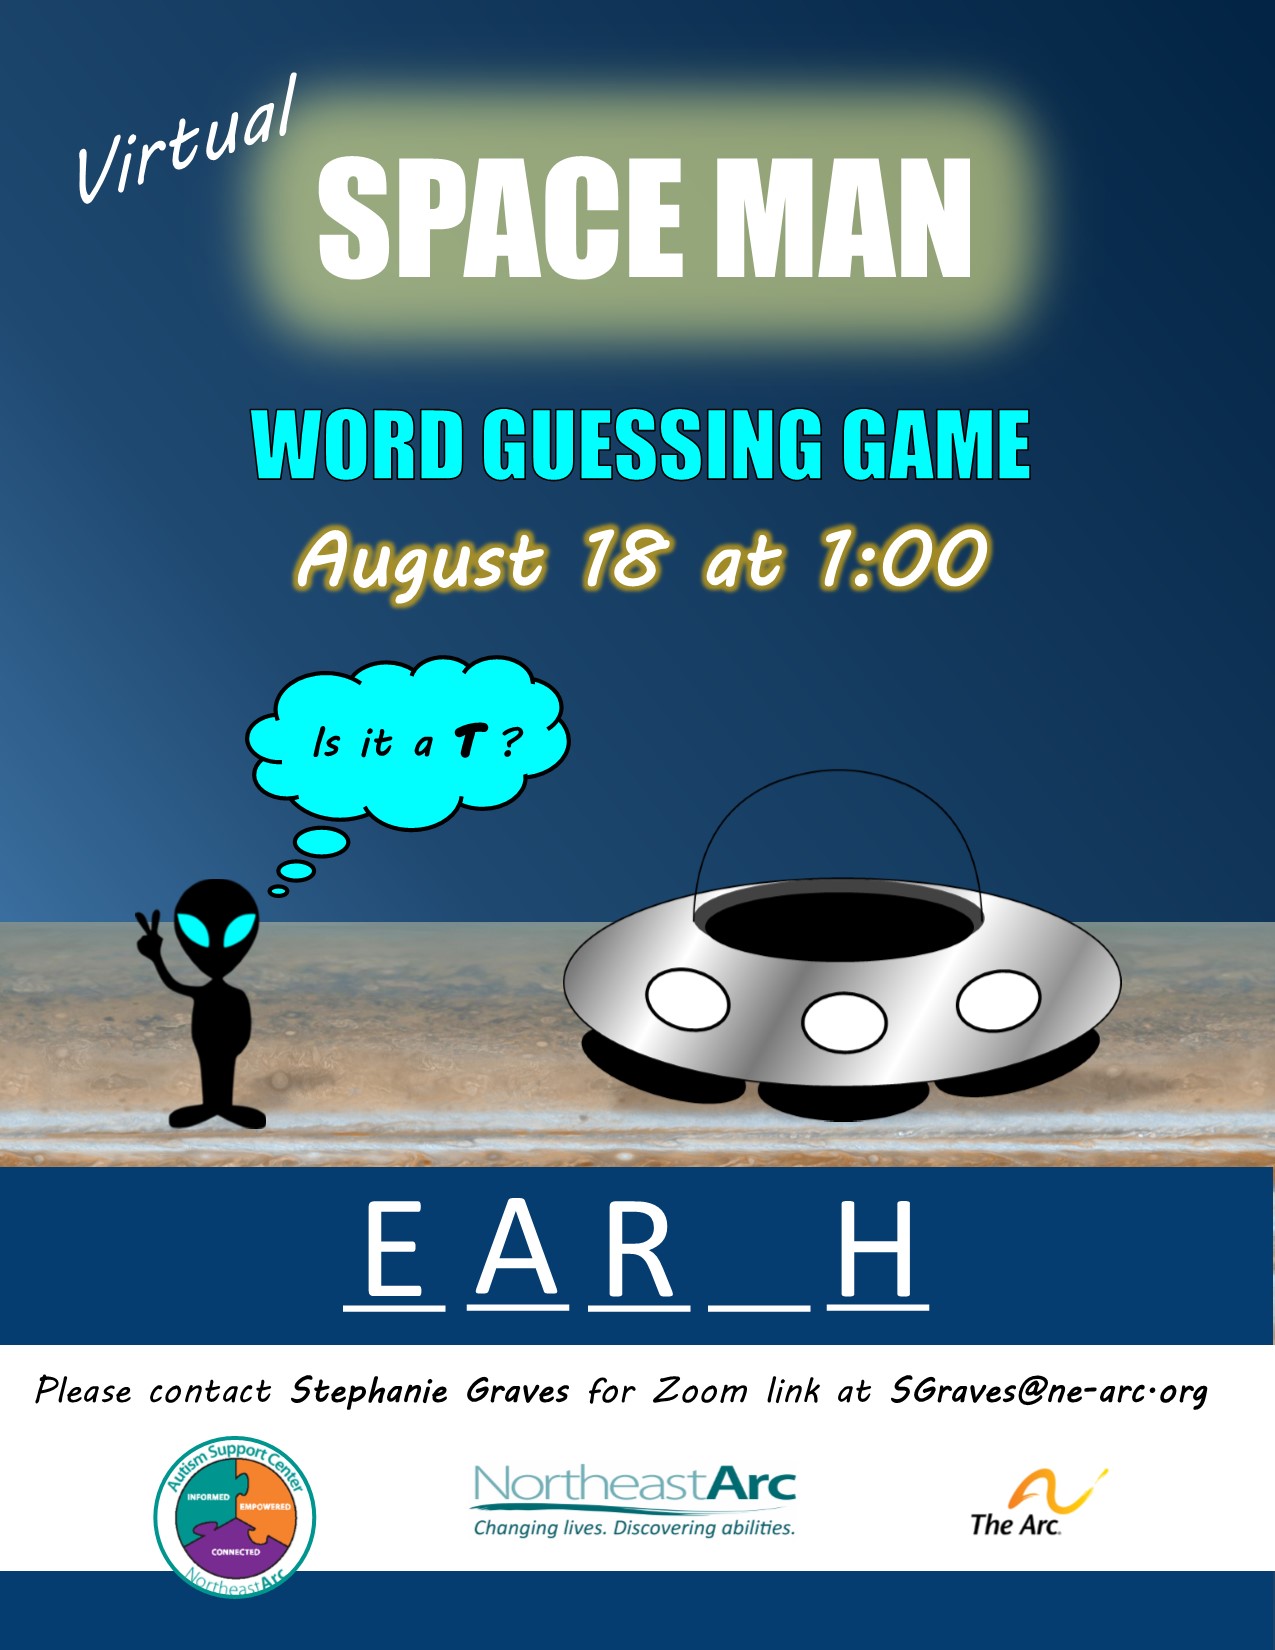 Flyer for Spaceman Virtual Word Game Event